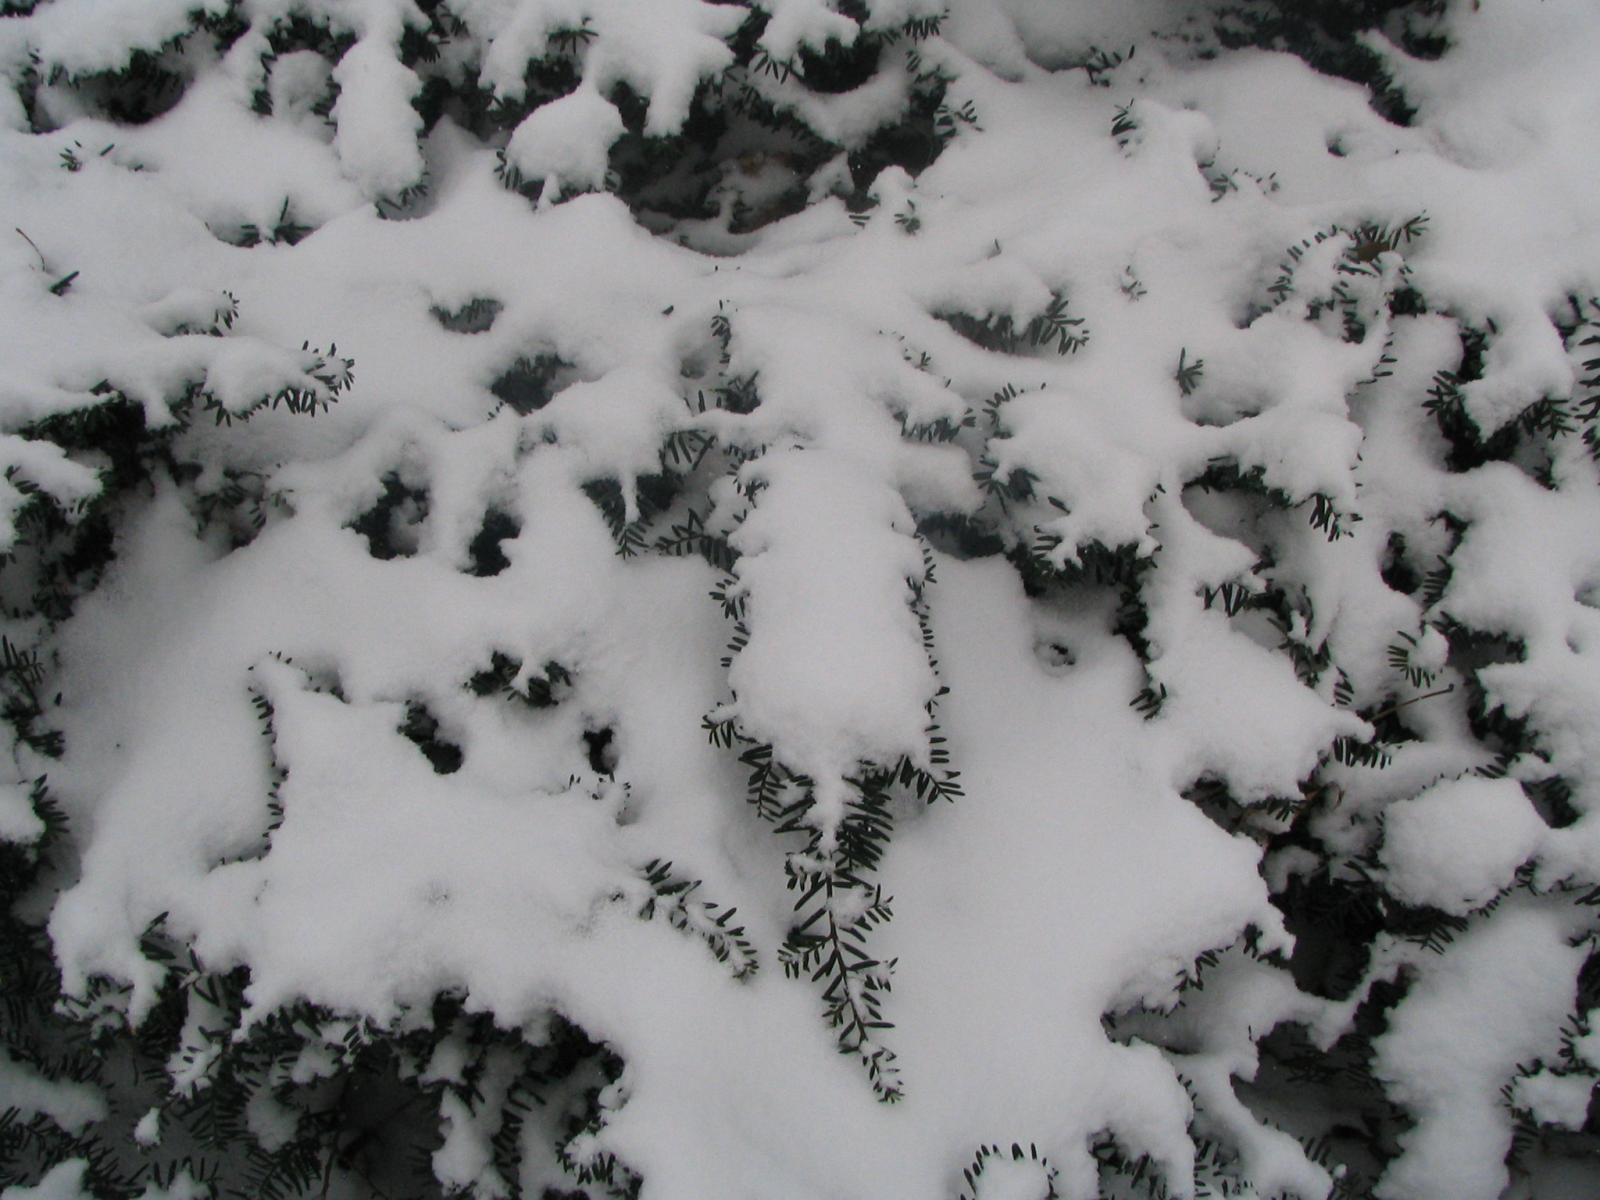 taxus in snow